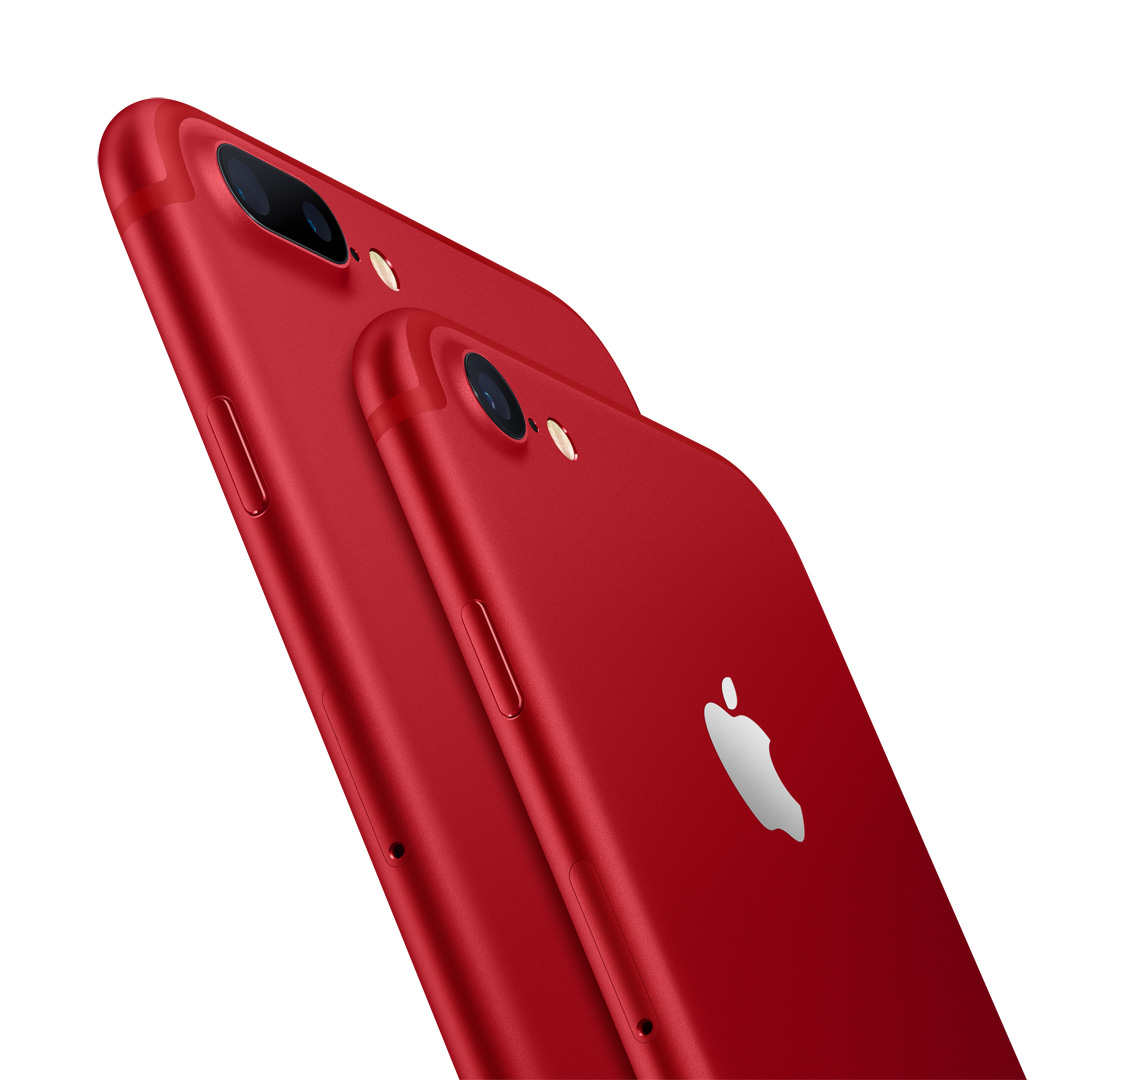 iPhone_7_and_iPhone_7_Plus_Product_Red_Hero_Lockup_2_Up_On_White_PR-Facebook_Large.jpg